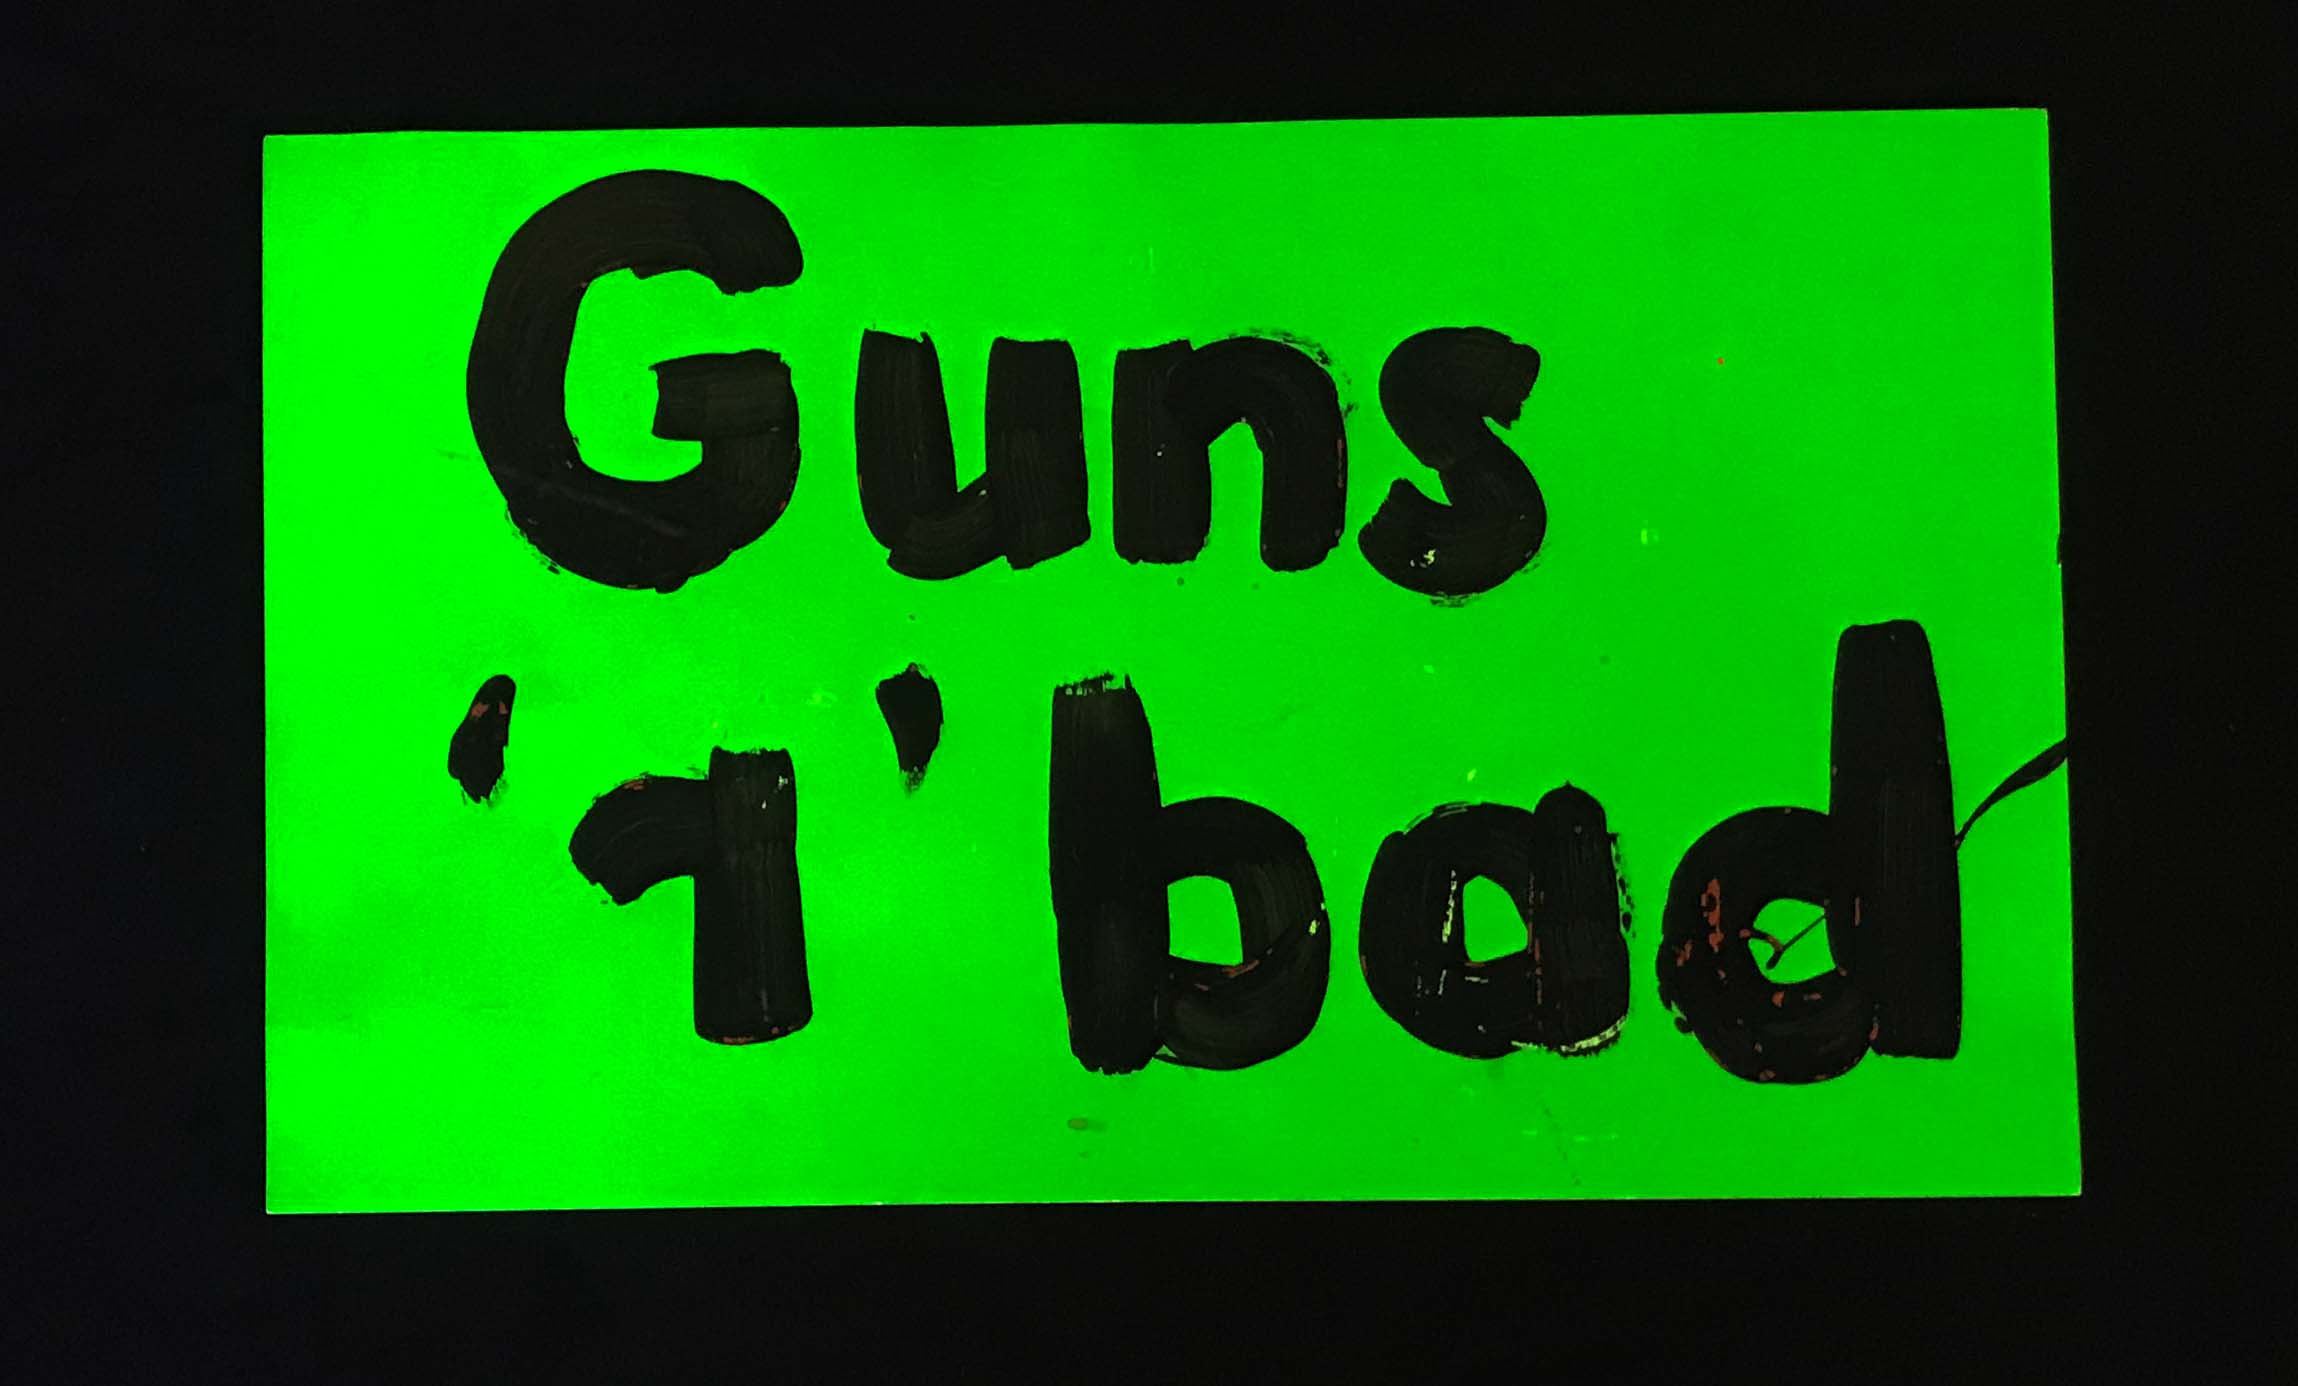 Charlotte March for Our Lives, 2018. Sign reads: "Guns r bad"